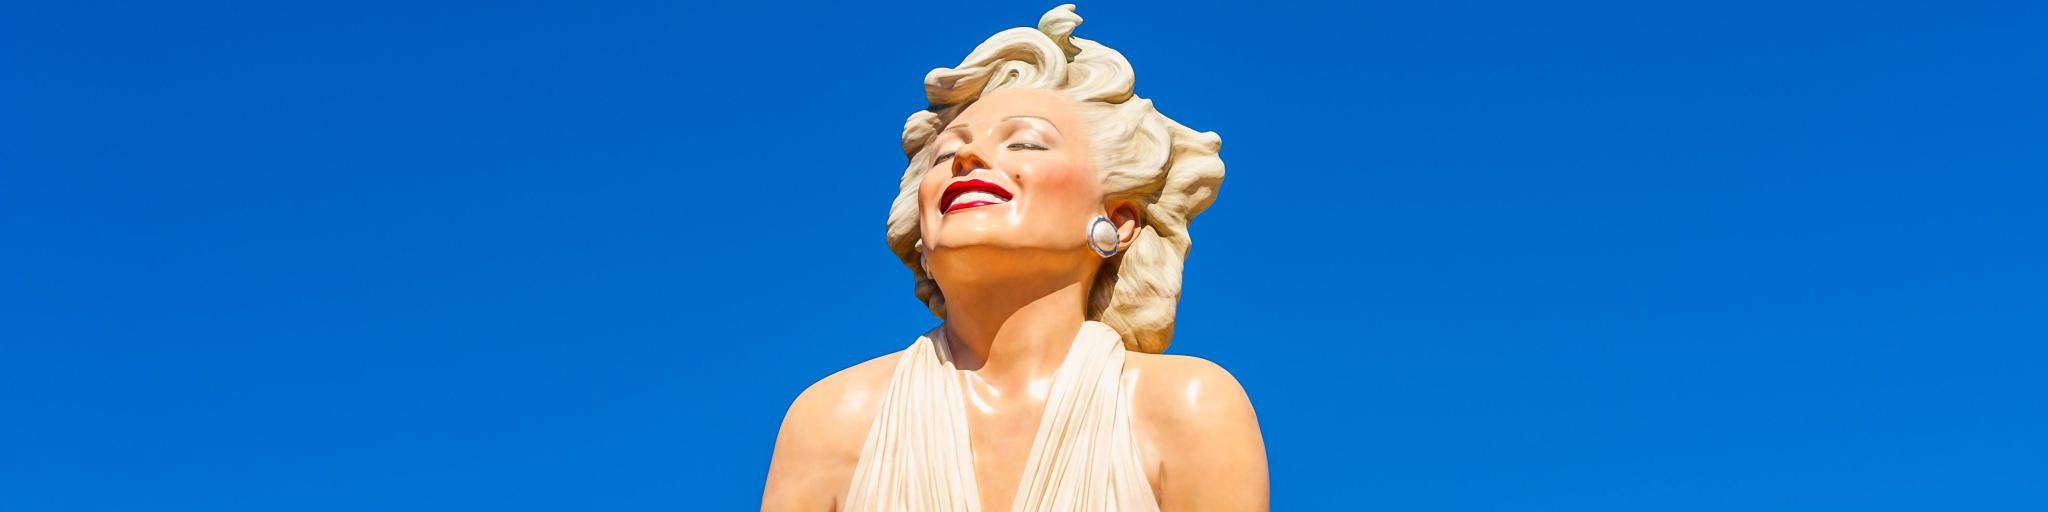 Top part of the Marilyn Monroe sculpture in Palm Springs